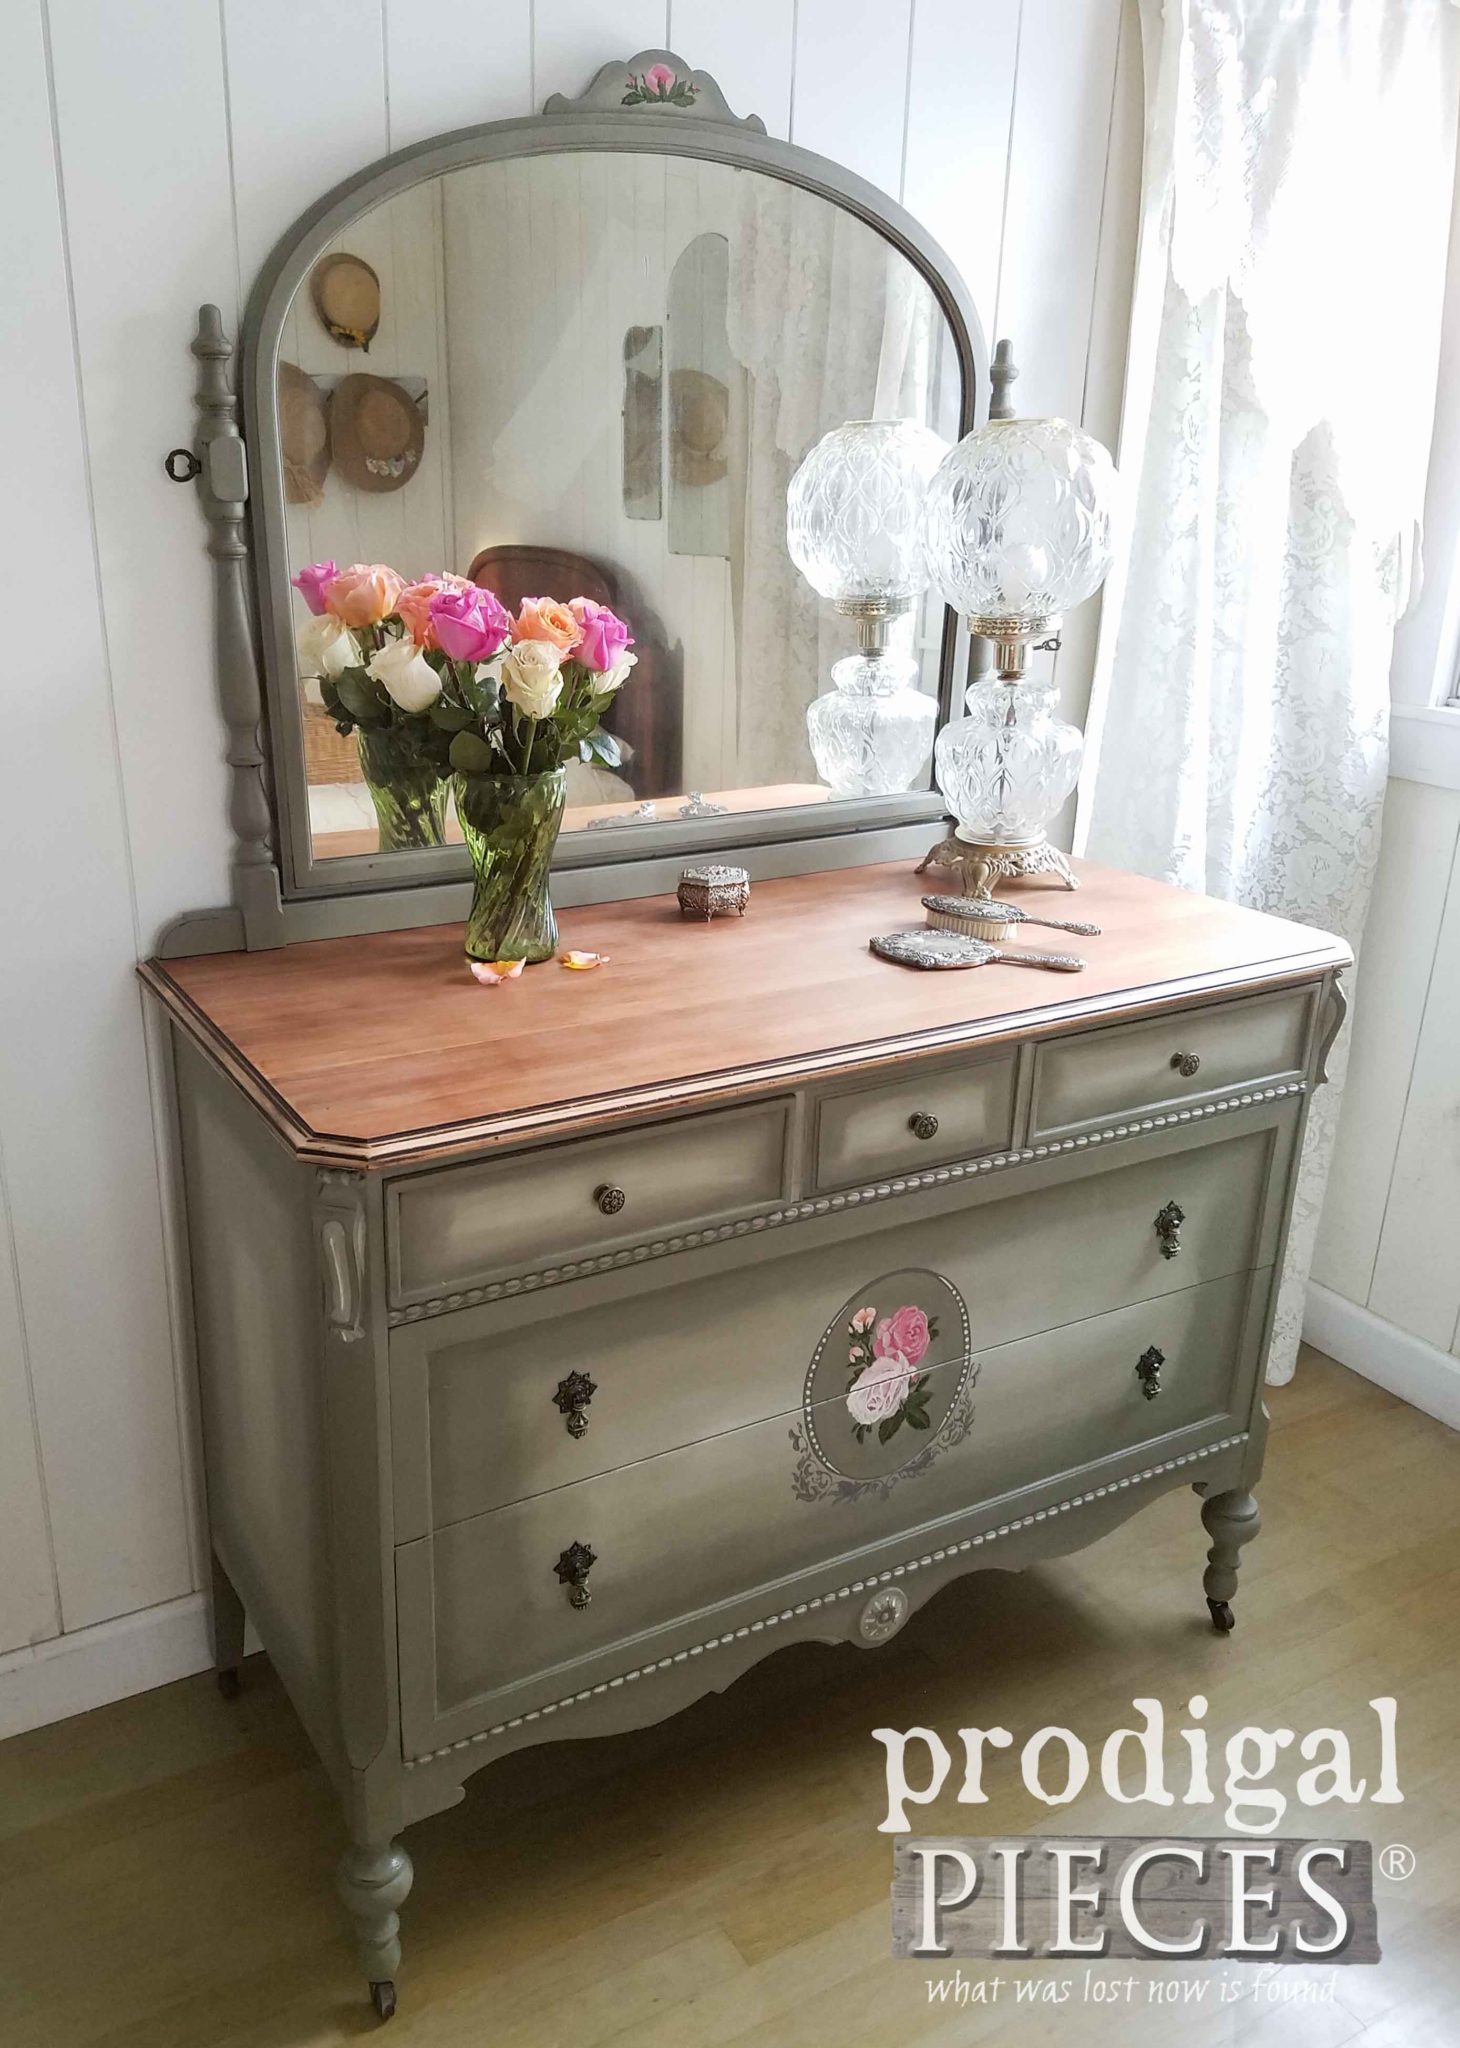 The details of this dresser are the forte of this piece by Larissa of Prodigal Pieces | Get the details at prodigalpieces.com